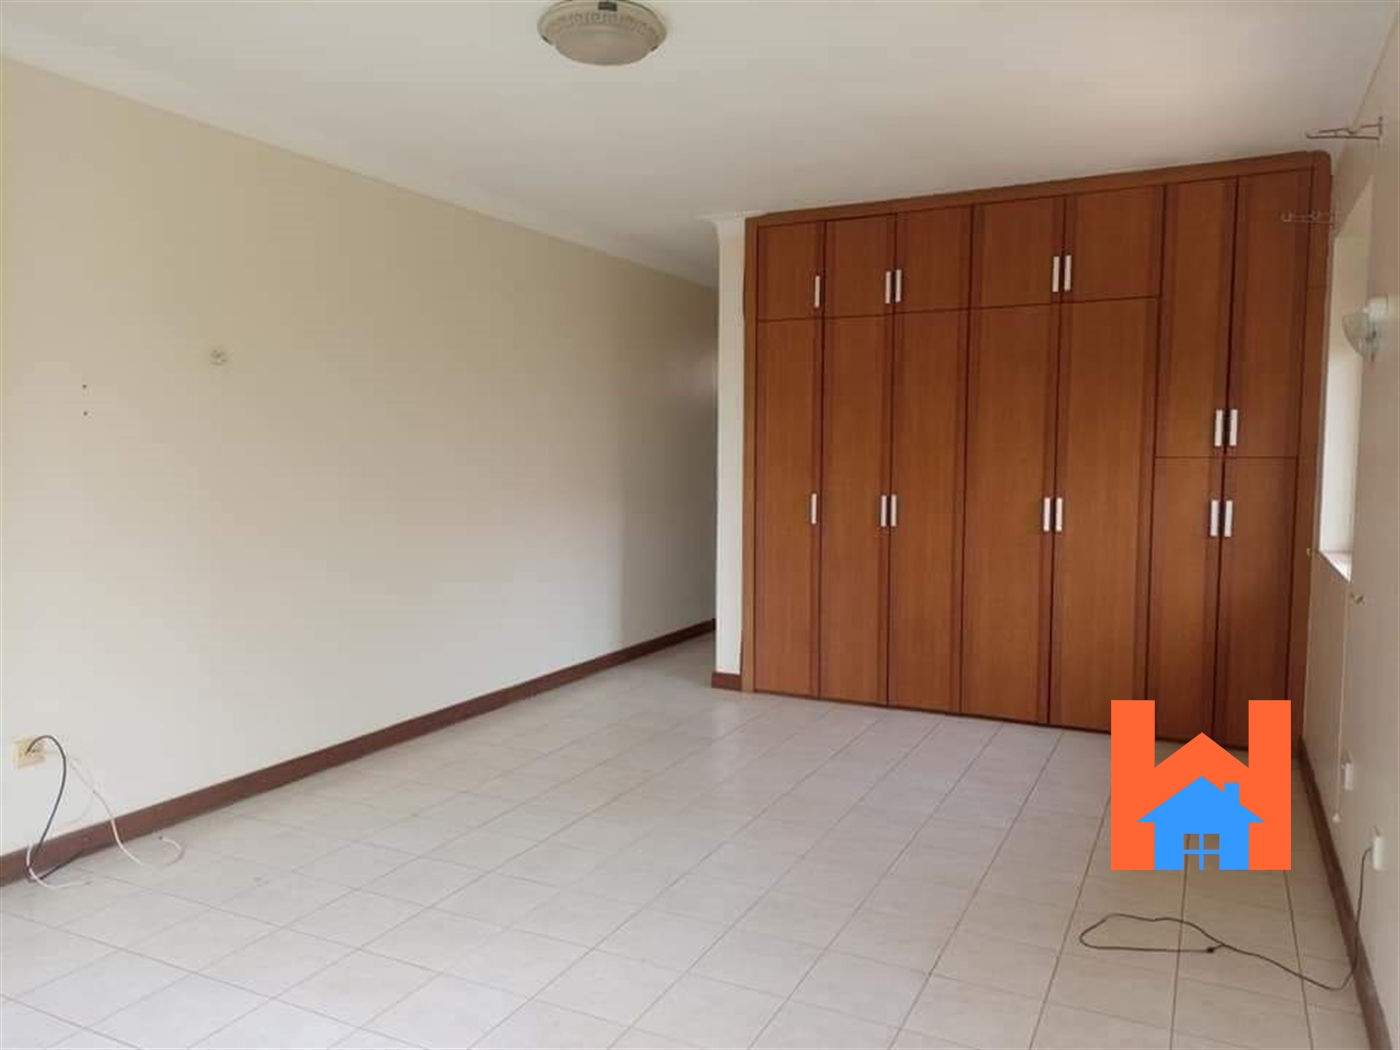 Storeyed house for rent in Mutungo Kampala